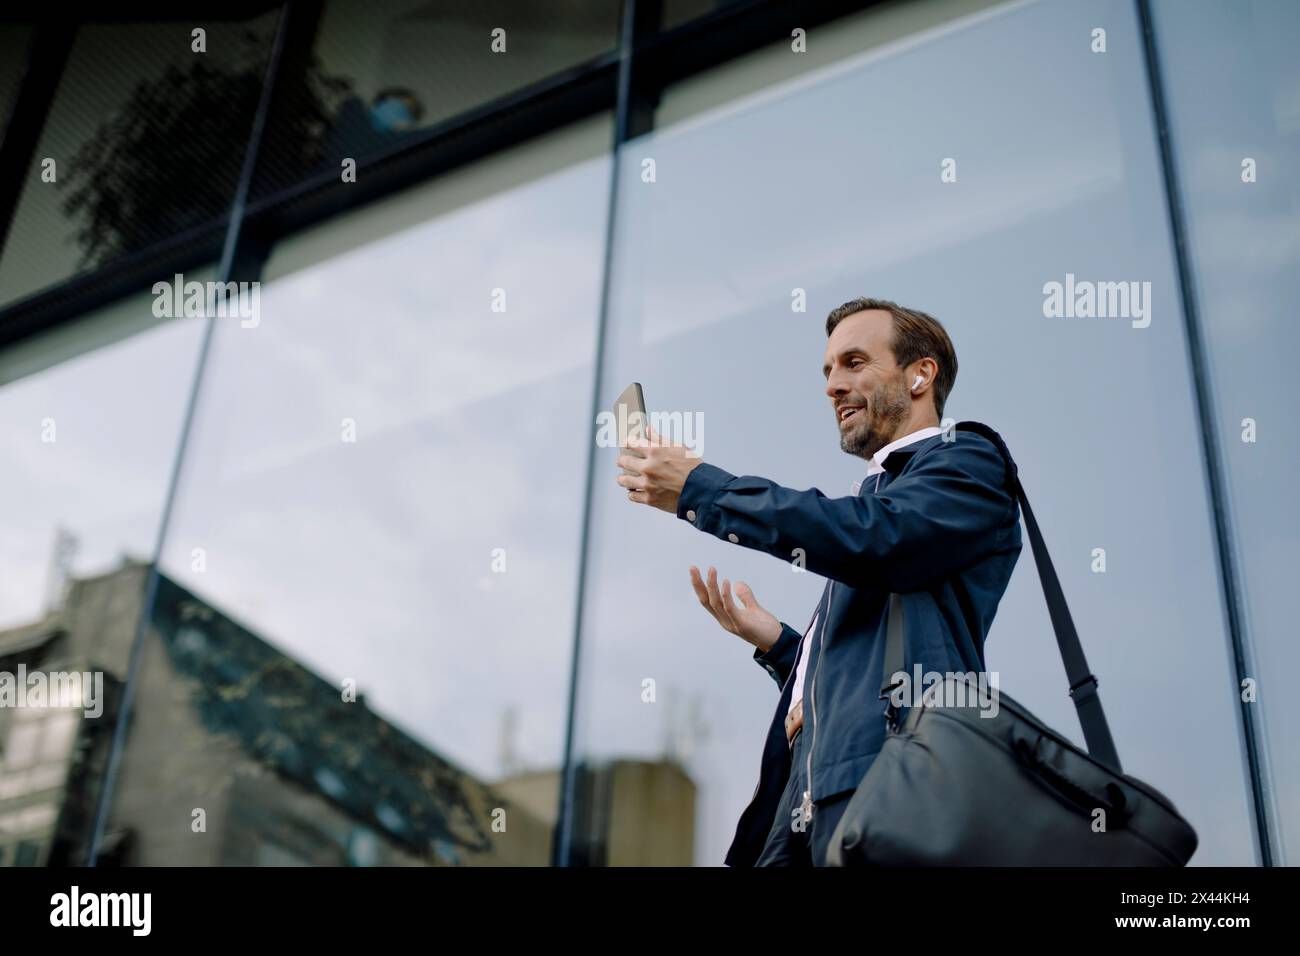 Low angle view of businessman on video call using smart phone while standing against glass building Stock Photo